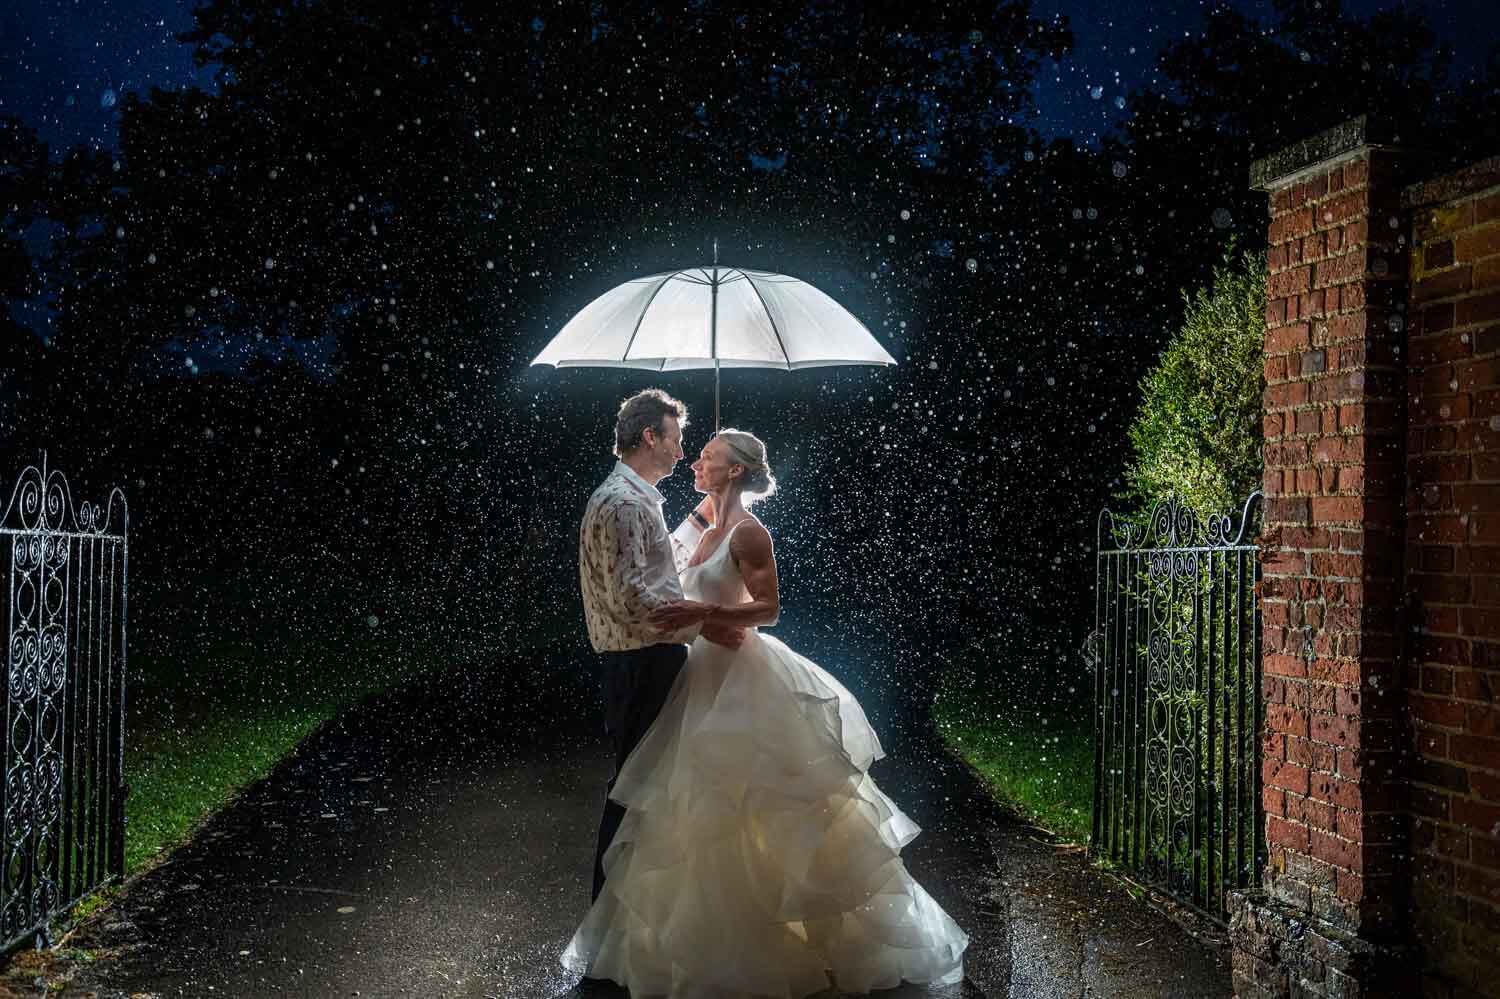 bride and groom embrace under an umbrella in the rain at night time and they are standing in the gateway at Warbrook house